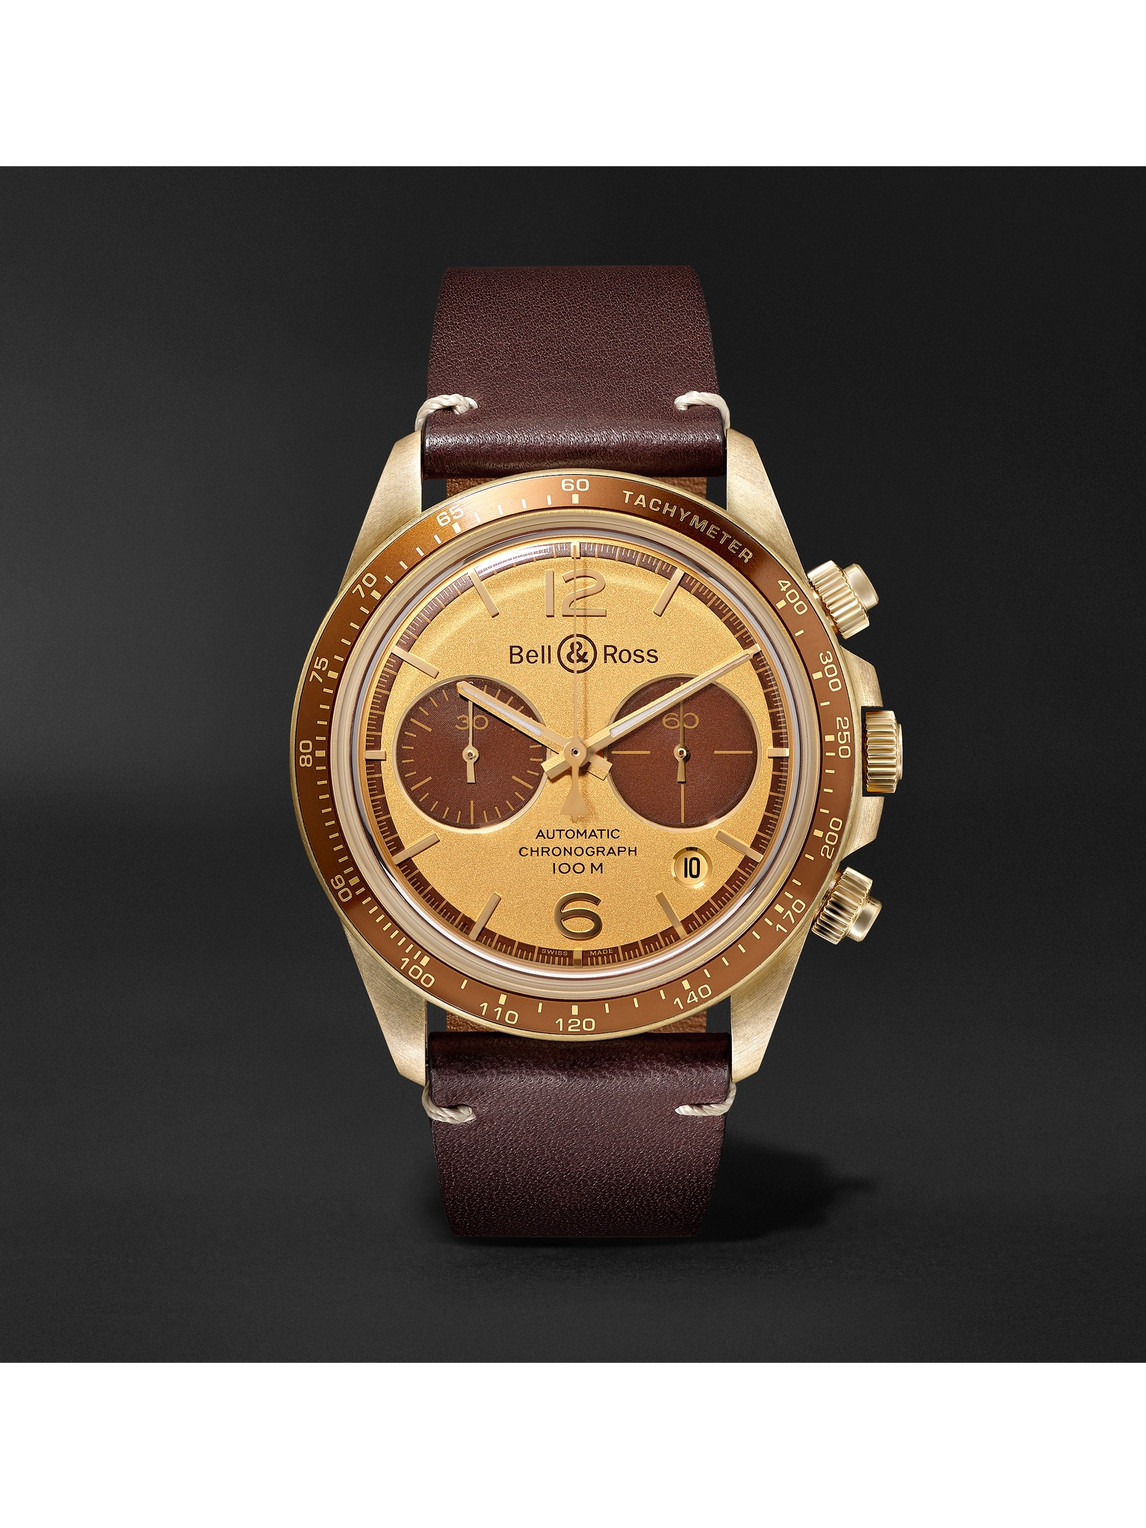 BR V2-94 Bellytanker 'El Mirage' The Rake x Revolution Limited Edition Automatic Chronograph 41mm Bronze and Leather Watch, Ref. No. BRV294-RR-BR/SCA